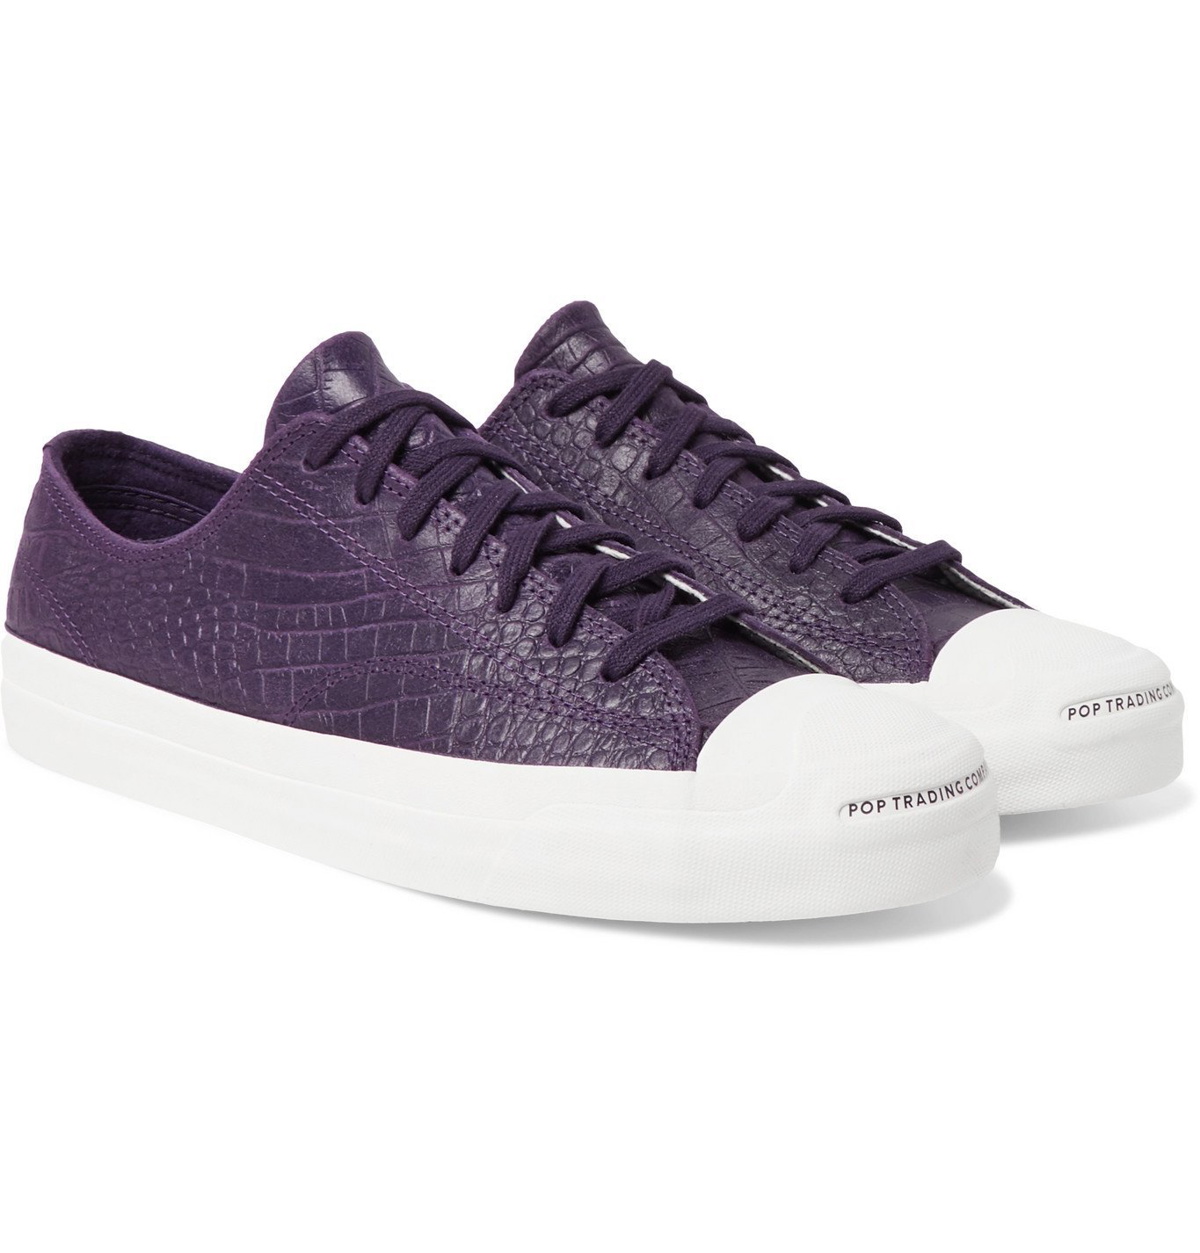 Converse - Pop Trading Company Jack Purcell Leather Sneakers - Purple Converse